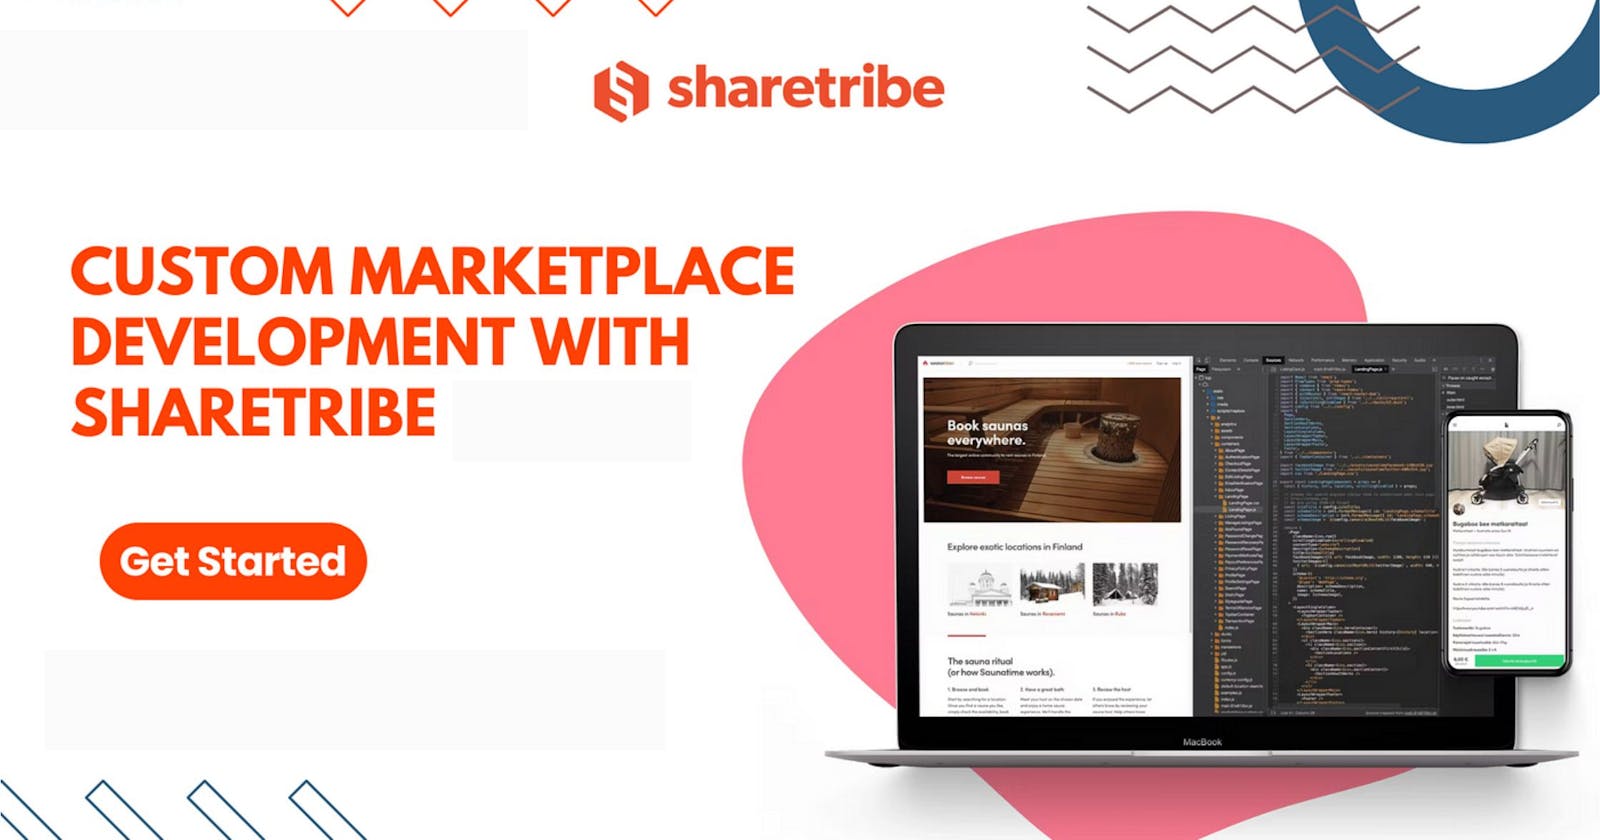 Sharetribe Development: Simplified Solutions for Your Marketplace Needs